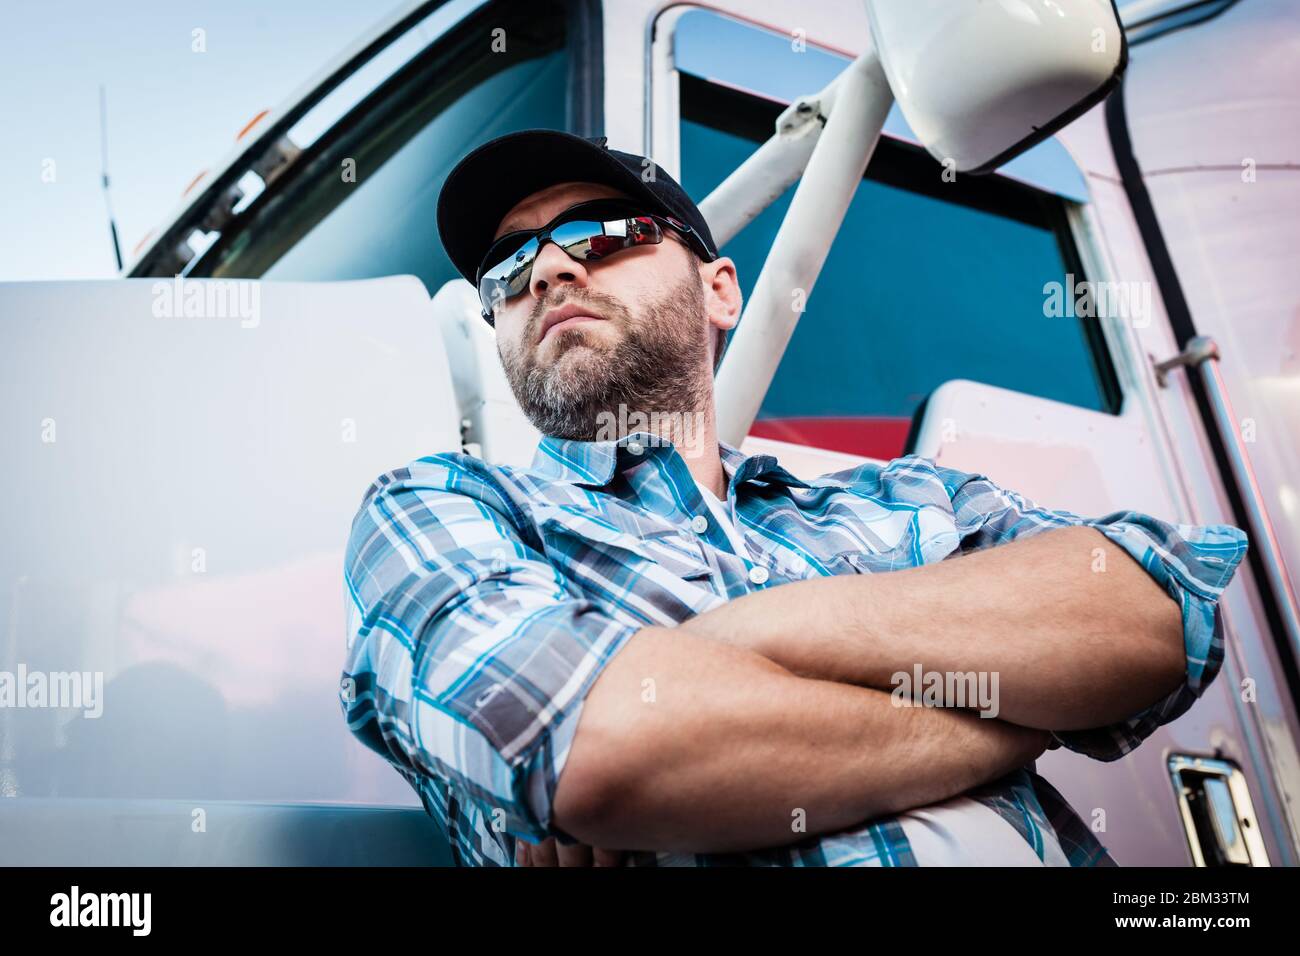 Confident Caucasian male american trucker next to his big rig. Concept of trucking owner operators with man in plaid shirt and baseball cap. Stock Photo